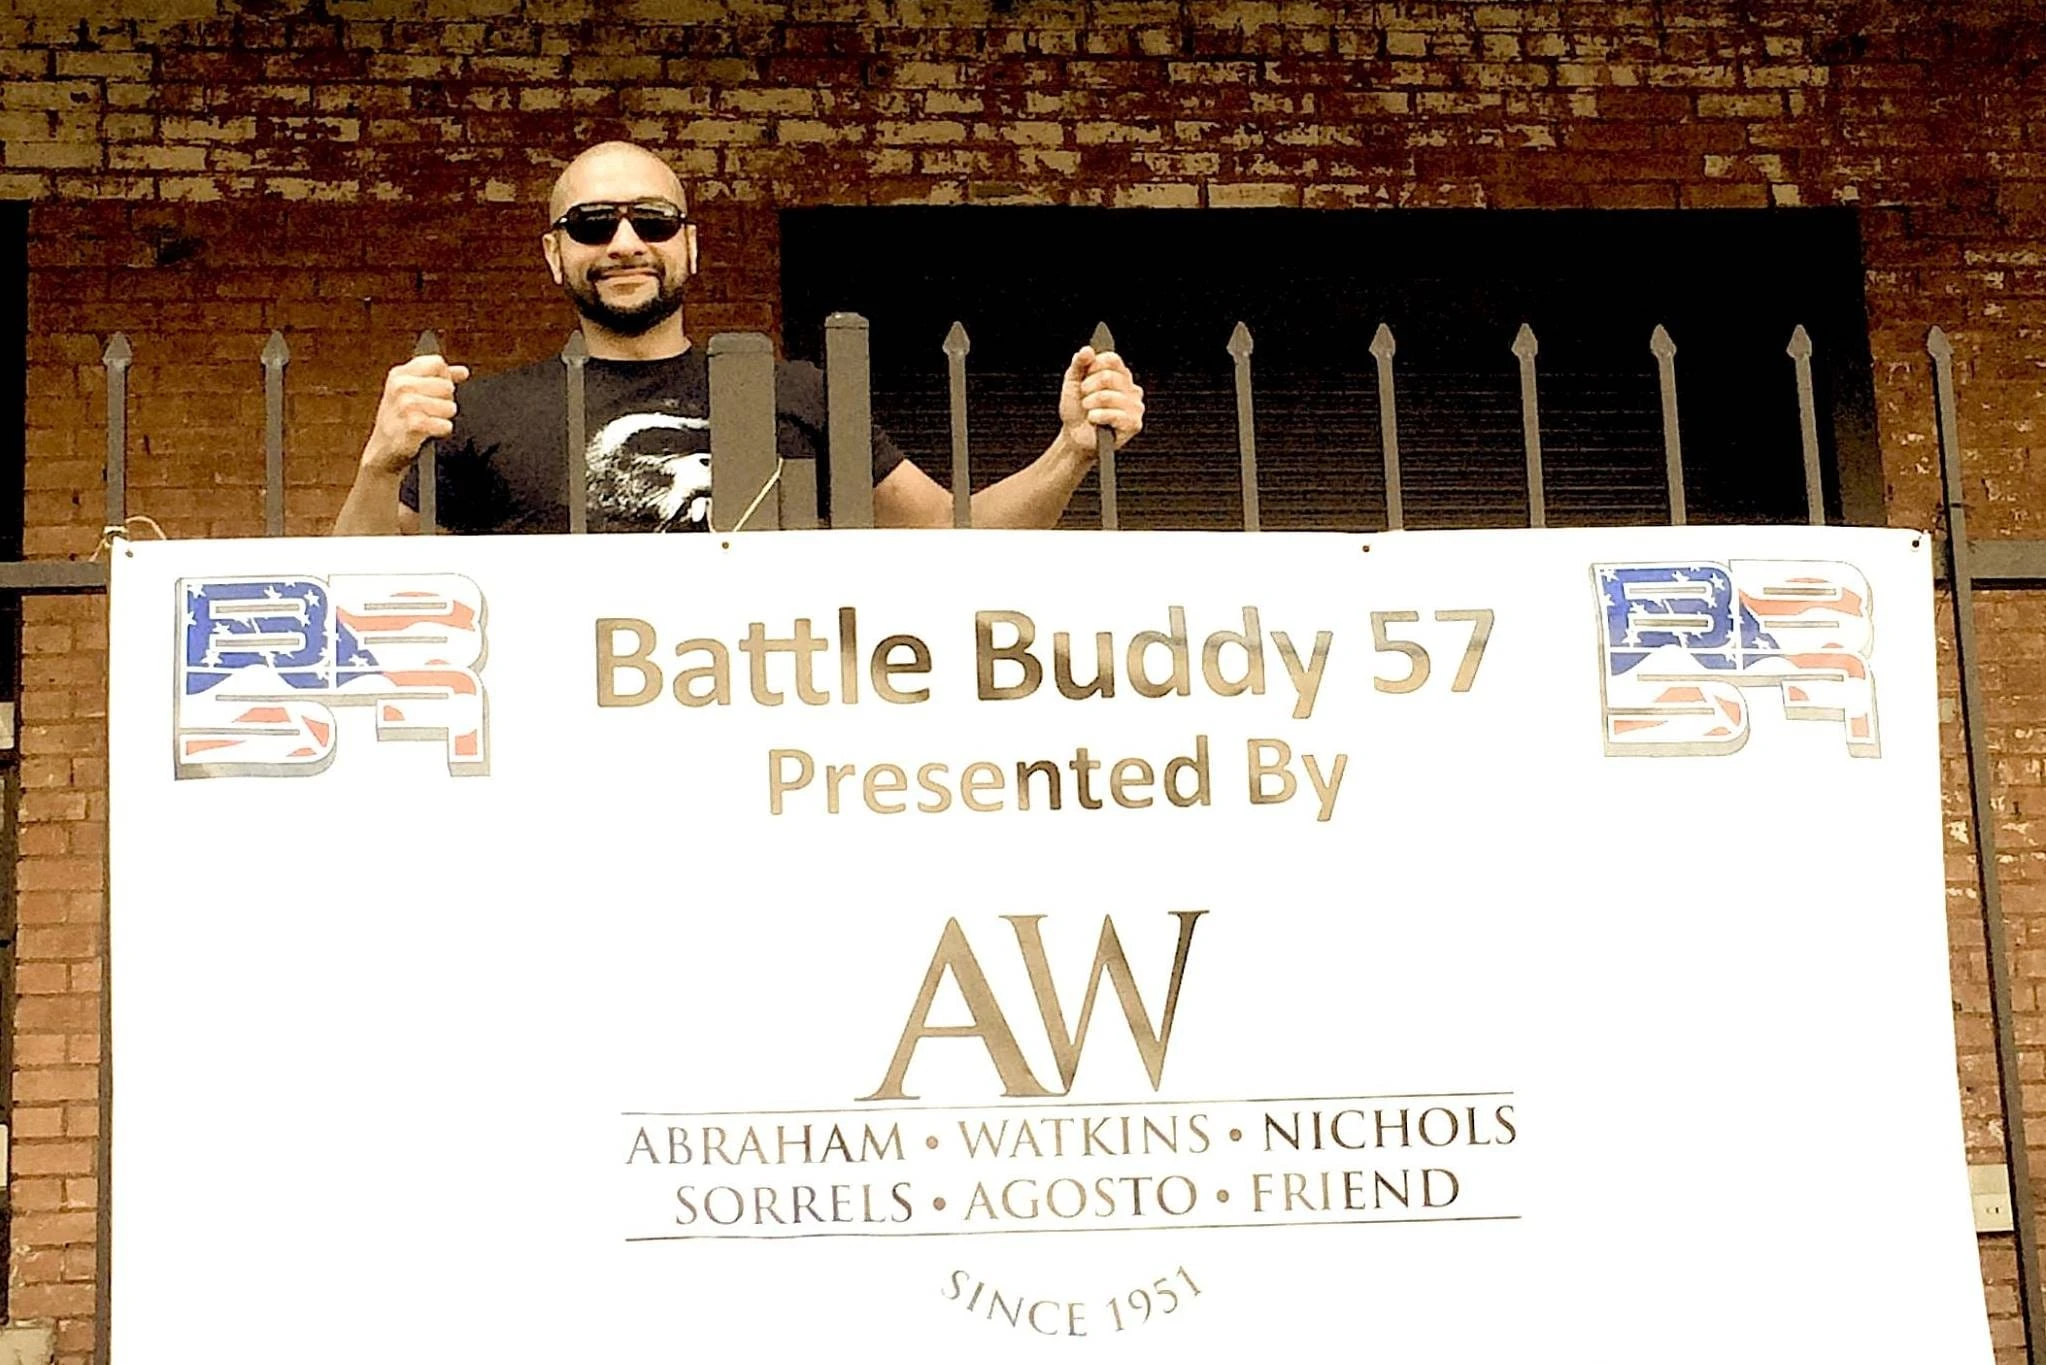 Partner Mo Aziz competed in Battle Buddies 57 for the second consecutive year